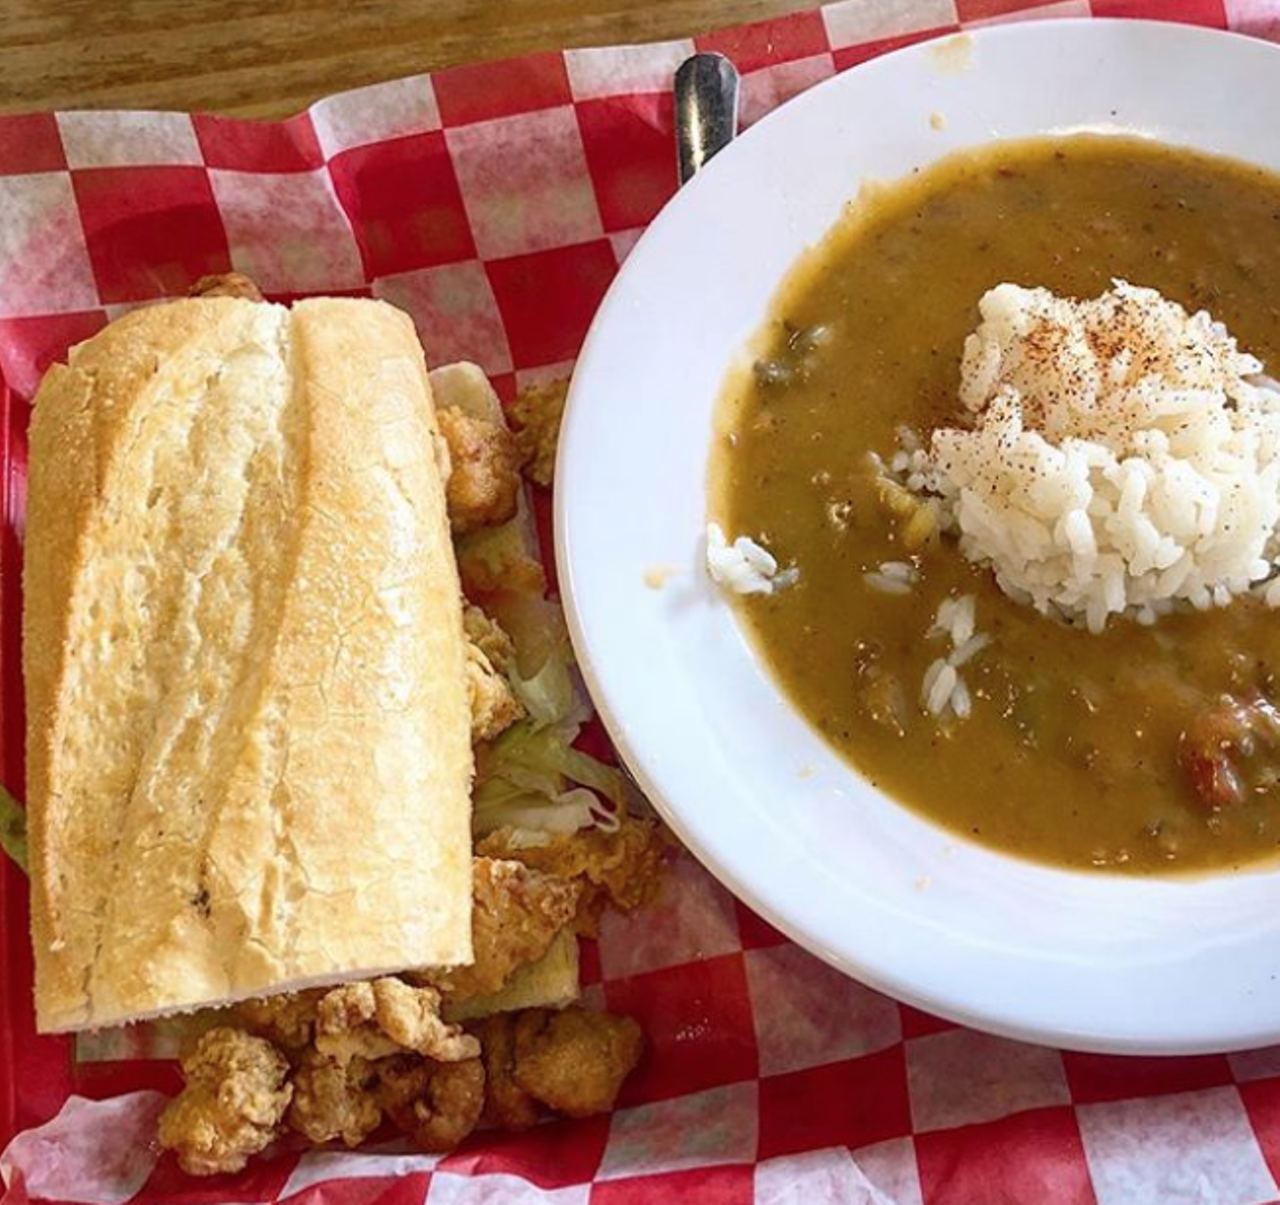 The Lost Cajun
226 W Bitters Road #120, (210) 549-0135, thelostcajun.com
The Lost Cajun may be a national chain, but it keeps it real with its crawfish offerings. Start of small with the crawfish pies or go all out with the crawfish étouffée.
Photo via Instagram / voteforpeter